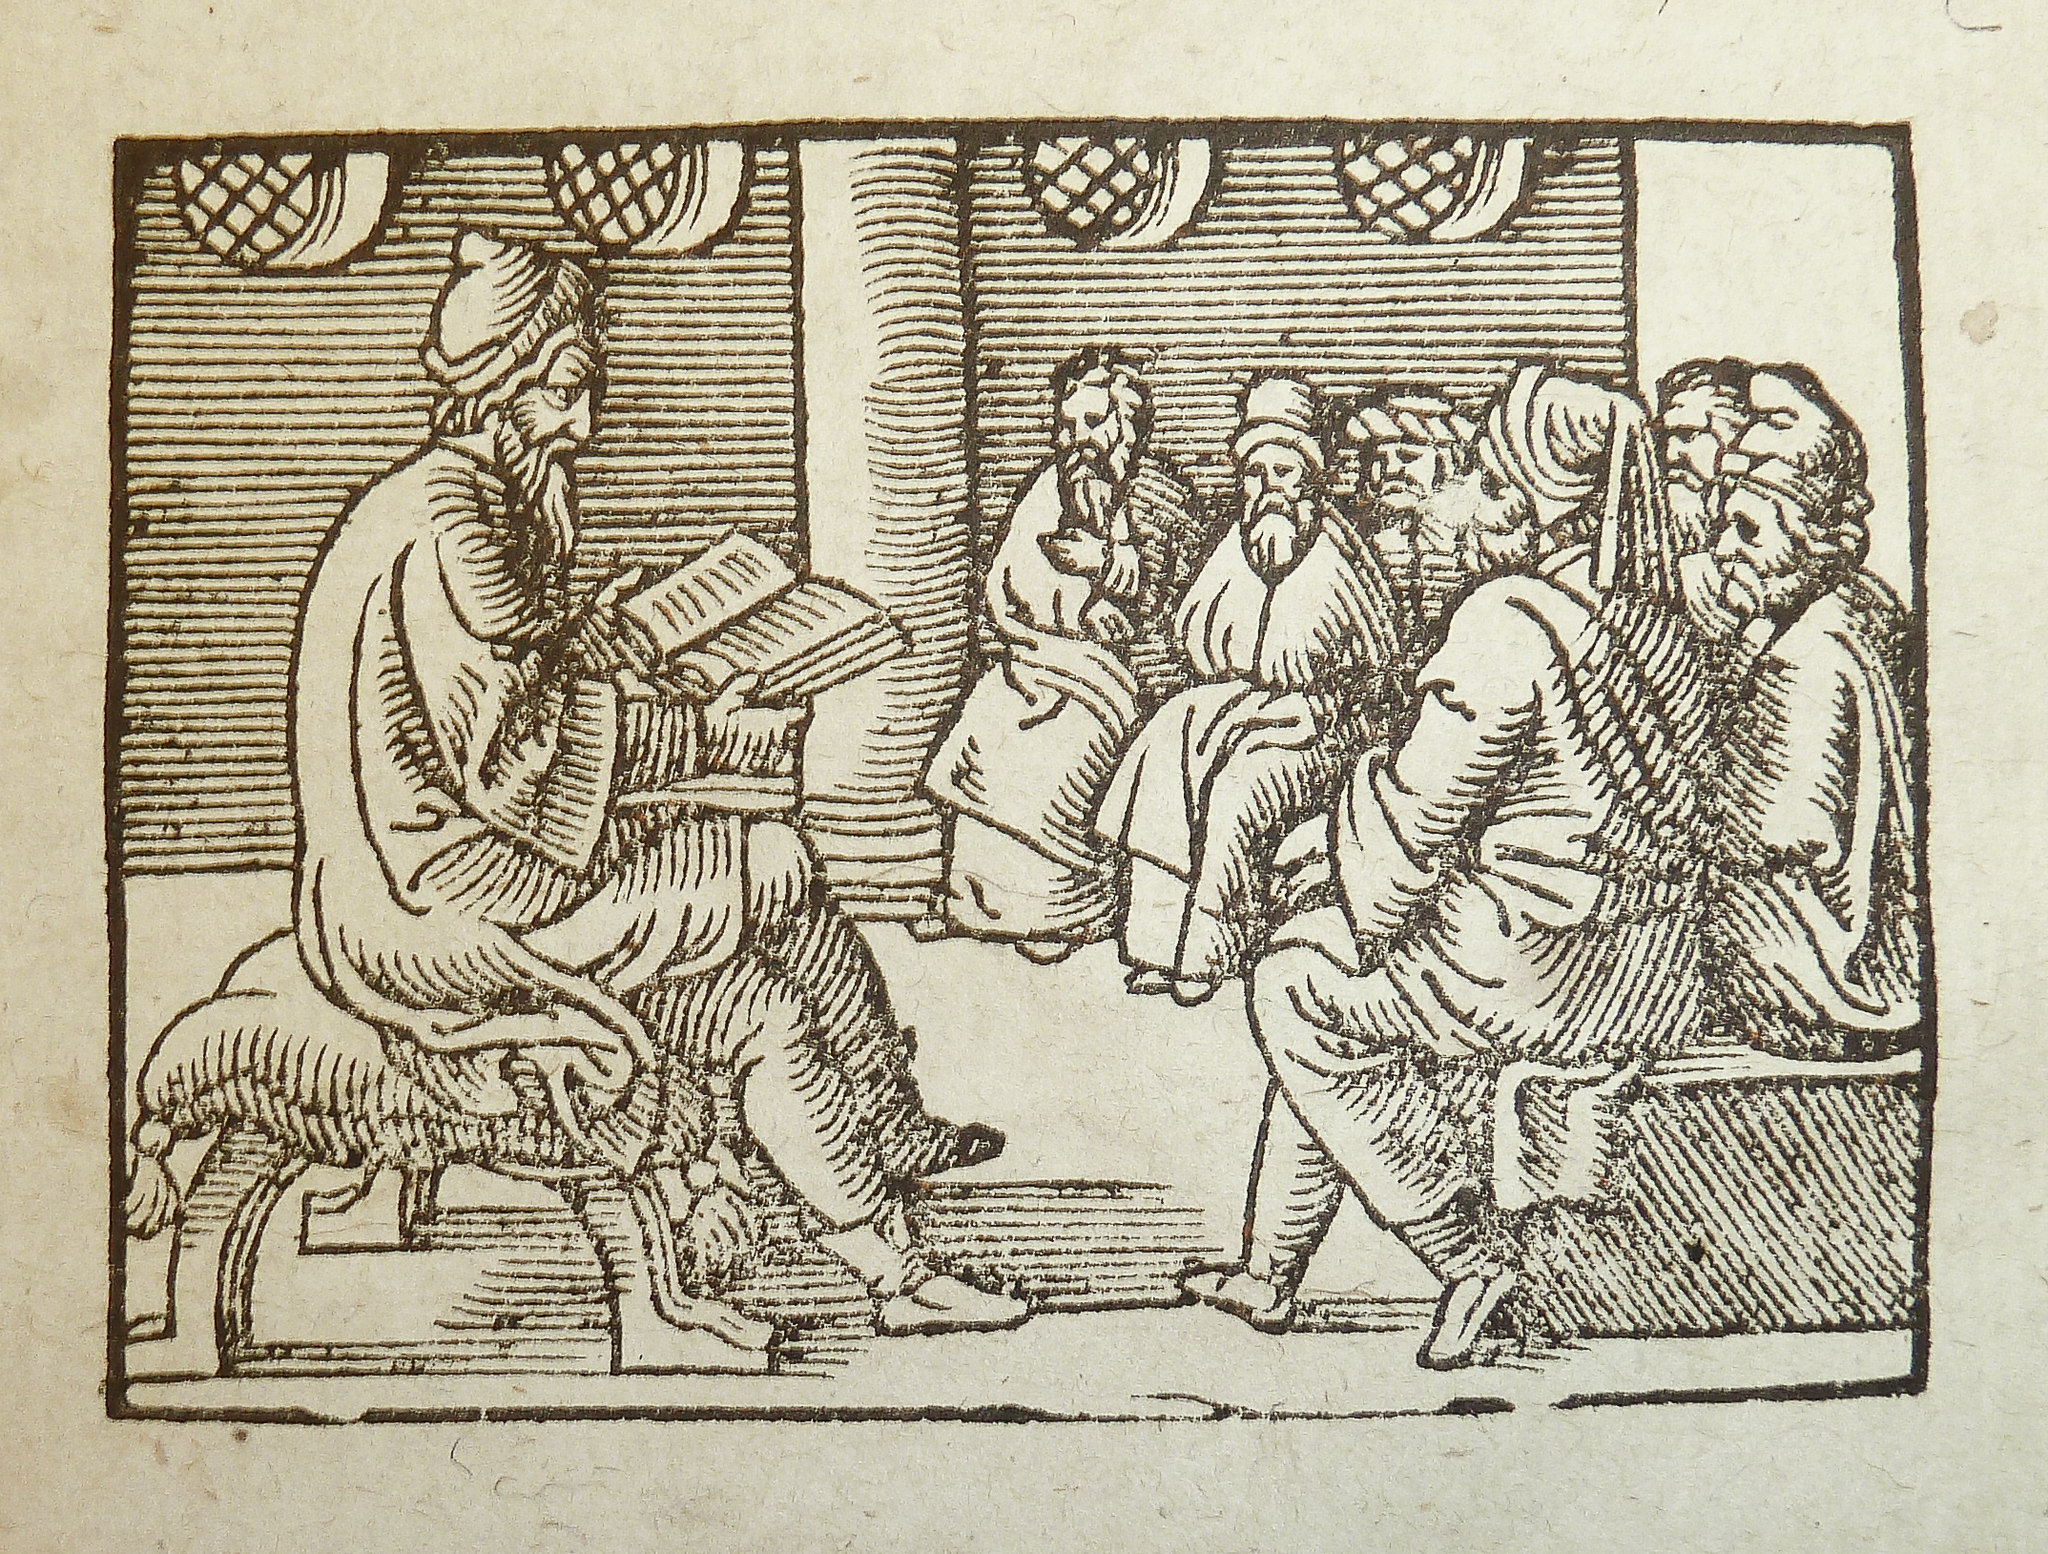 Woodcut illustration of a teacher and students